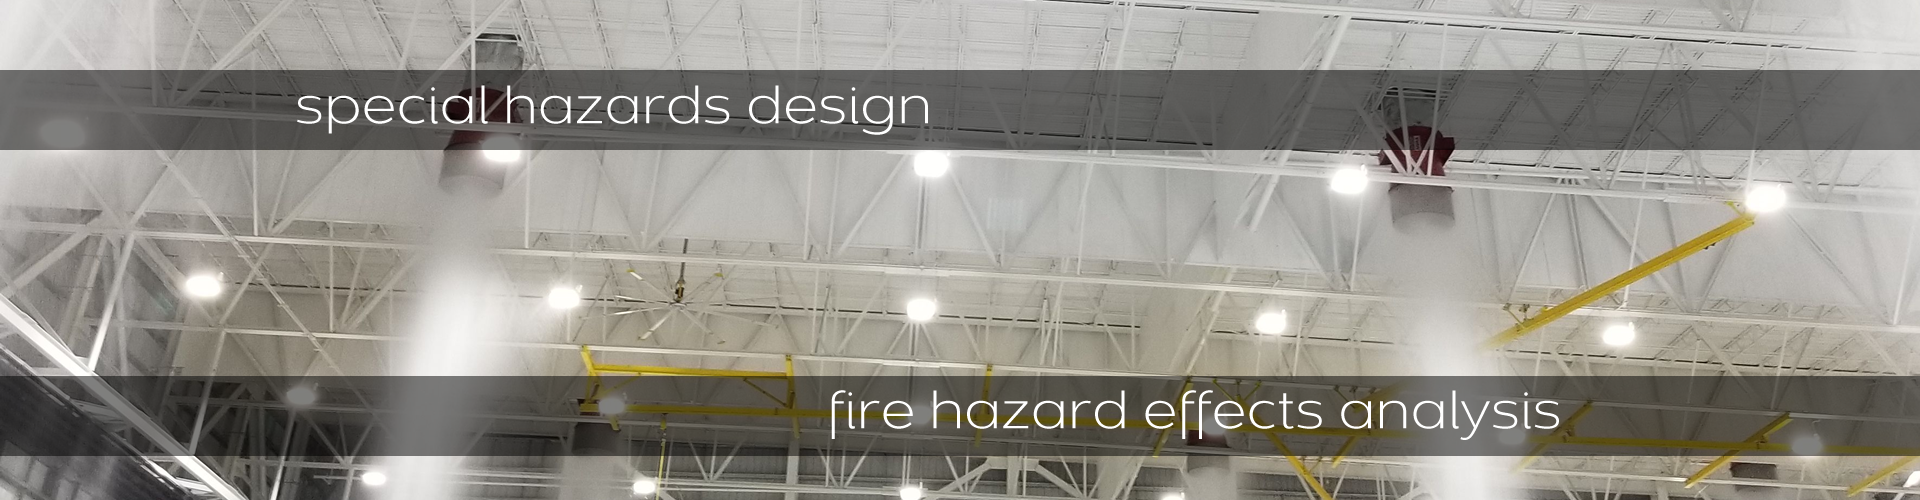 Hatcher Engineering - 813.752.6900 - fire protection engineering, design, & consulting